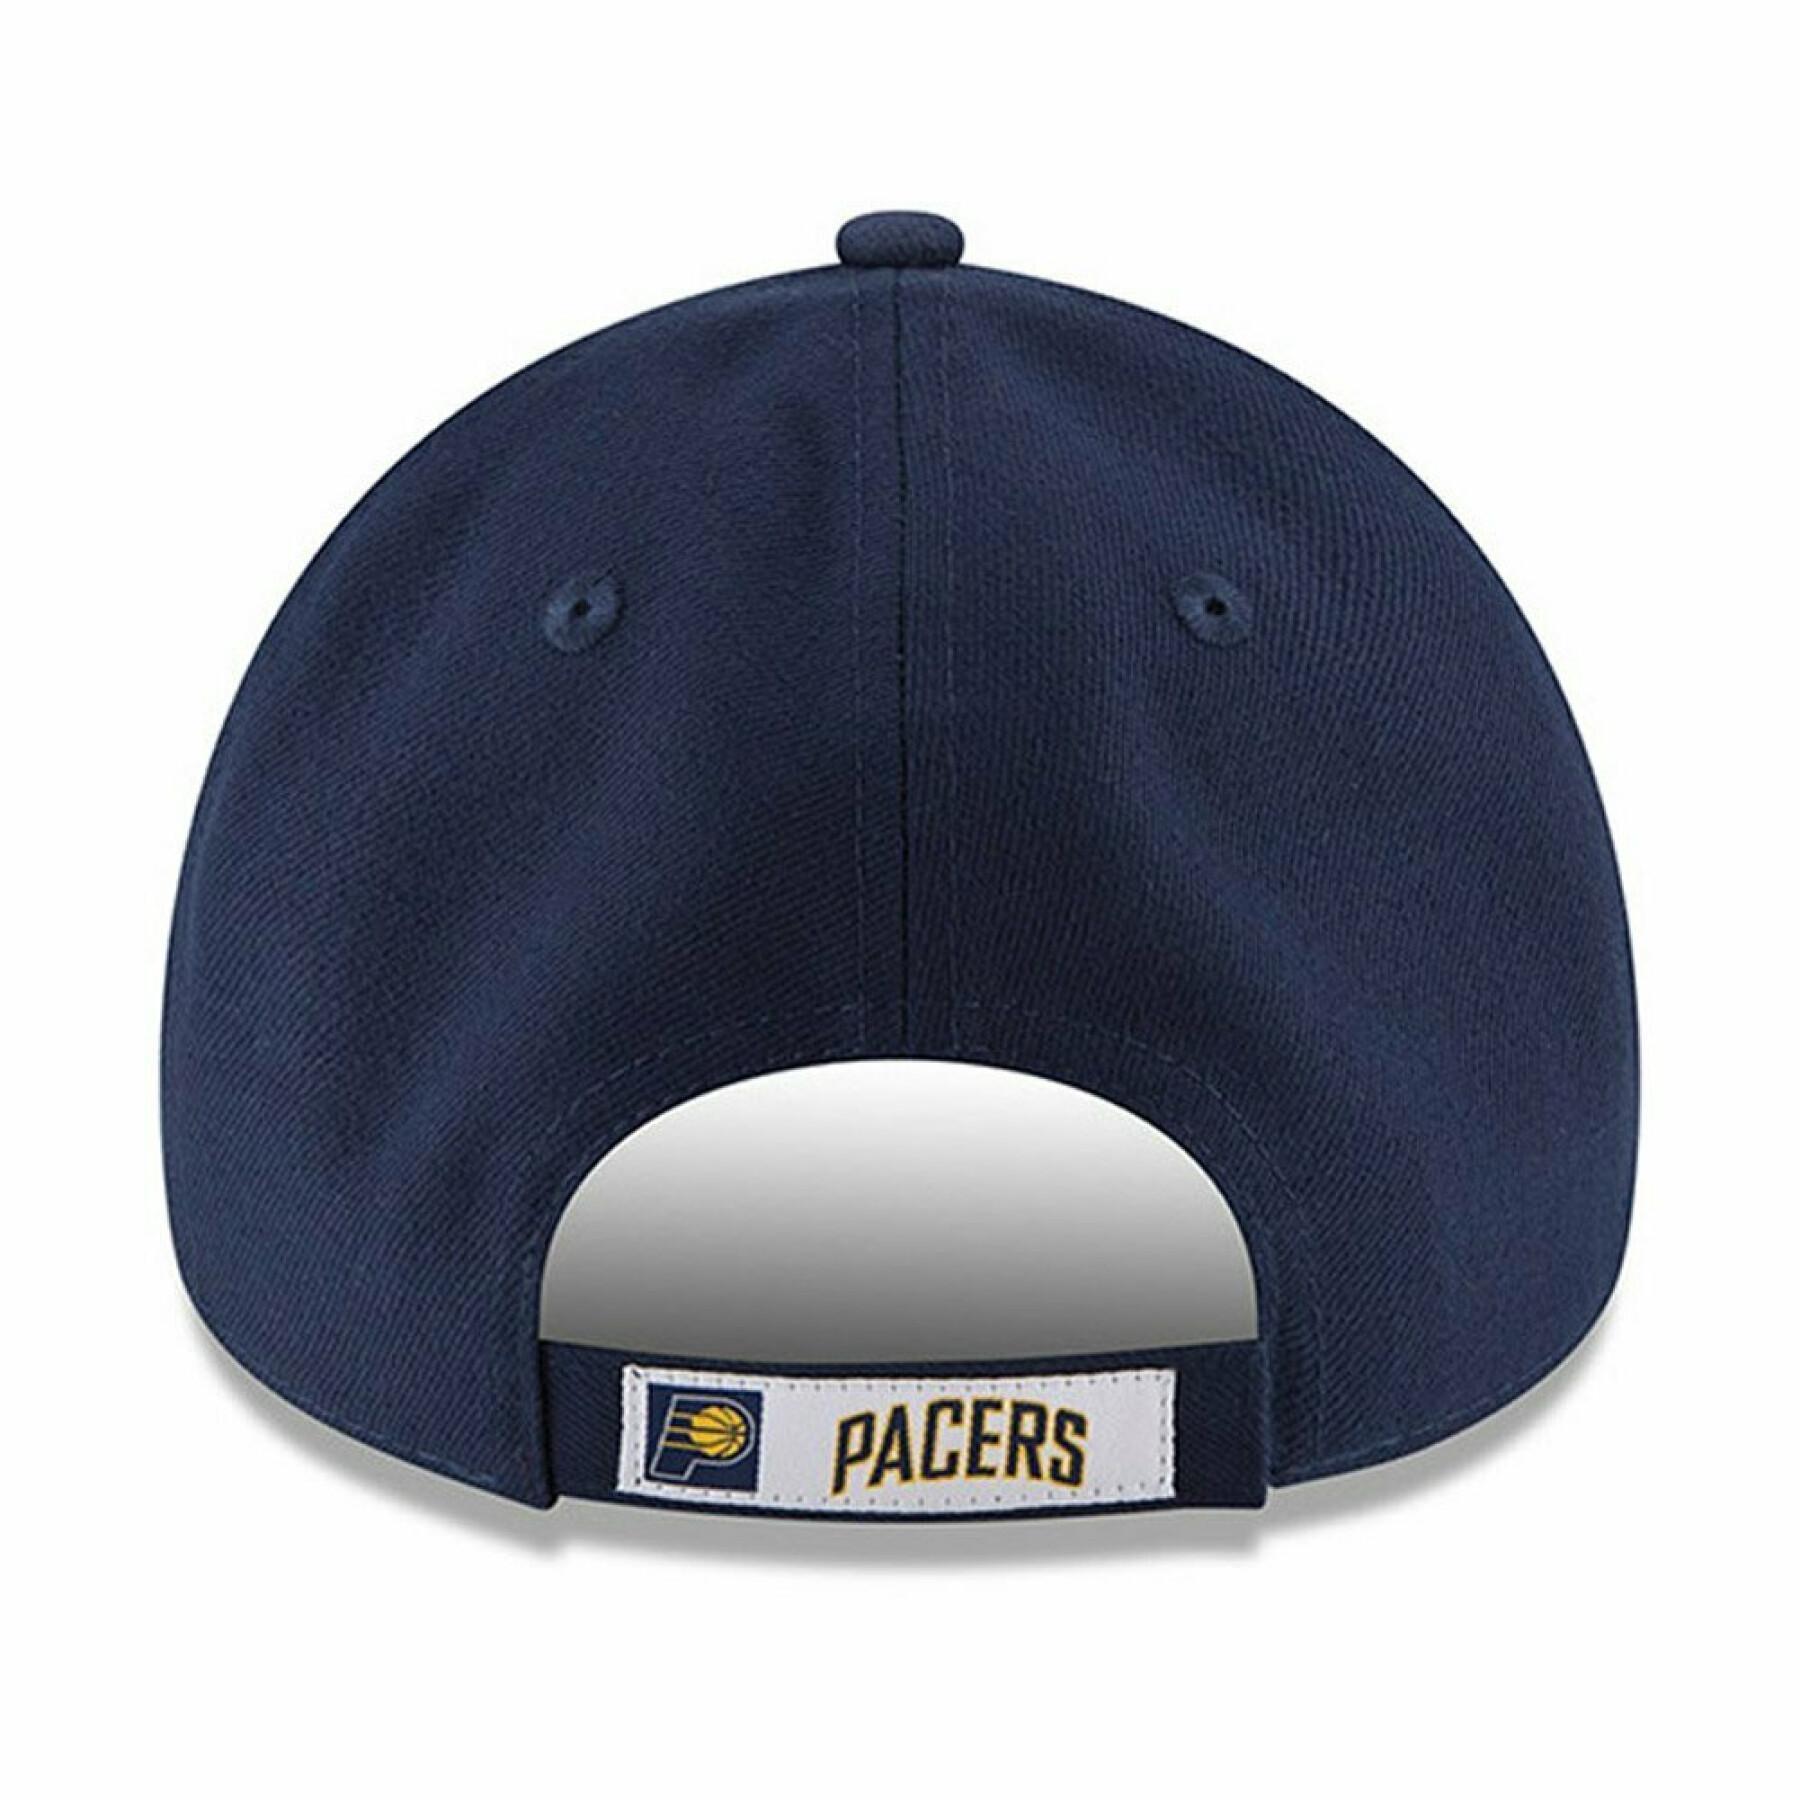 Kappe New Era 9FORTY The League Indiana Pacers